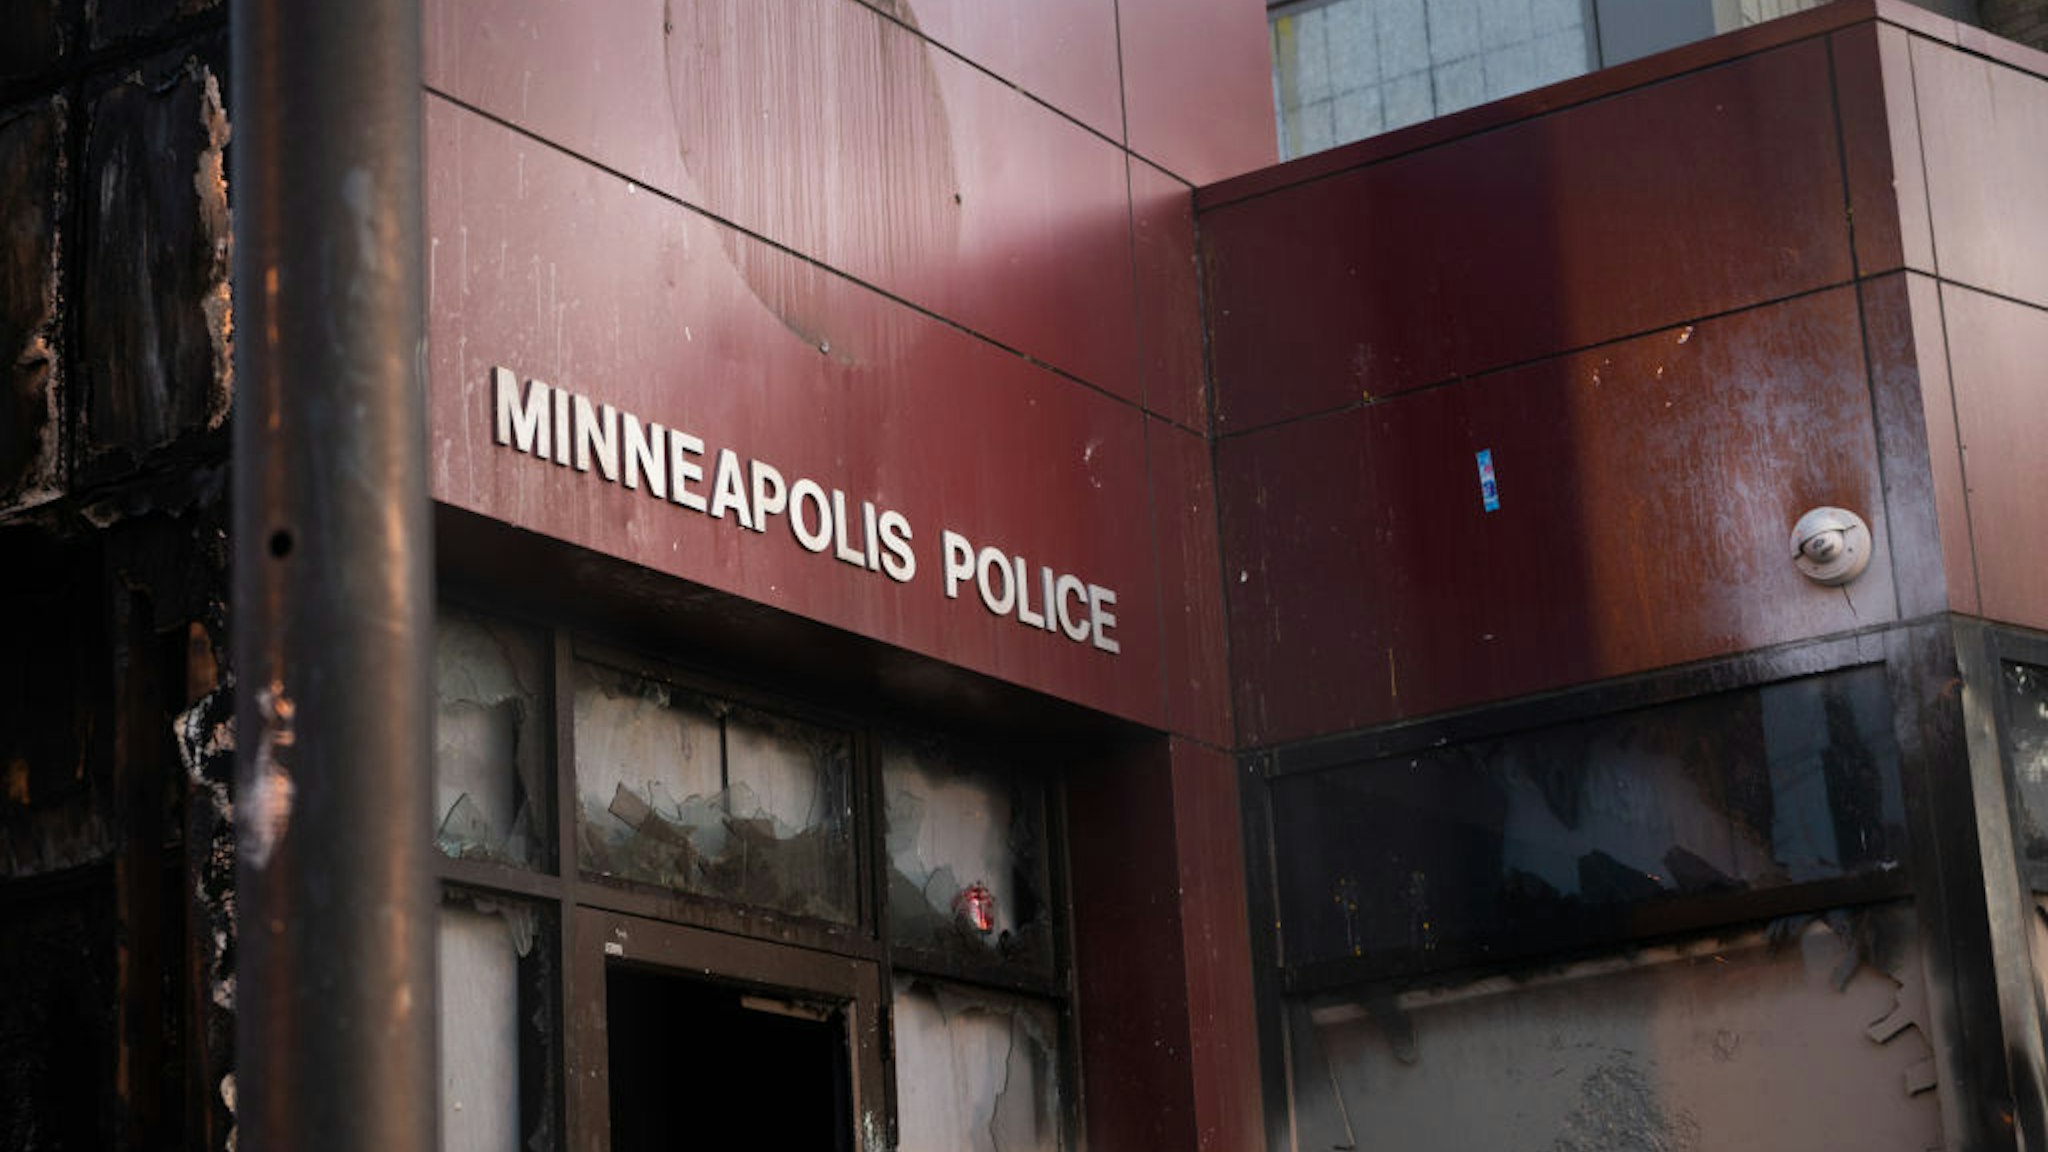 The 3rd Precinct Police Station was abandoned by police and protestors took destroying it and raiding it after one of Minneapolis' police officers killed an African-American man named George Floyd in Minneapolis, United States, on May 29, 2020. Protests continued following the death of George Floyd, who died after being restrained by Minneapolis police officers on Memorial Day. (Photo by Zach D Roberts/NurPhoto via Getty Images)